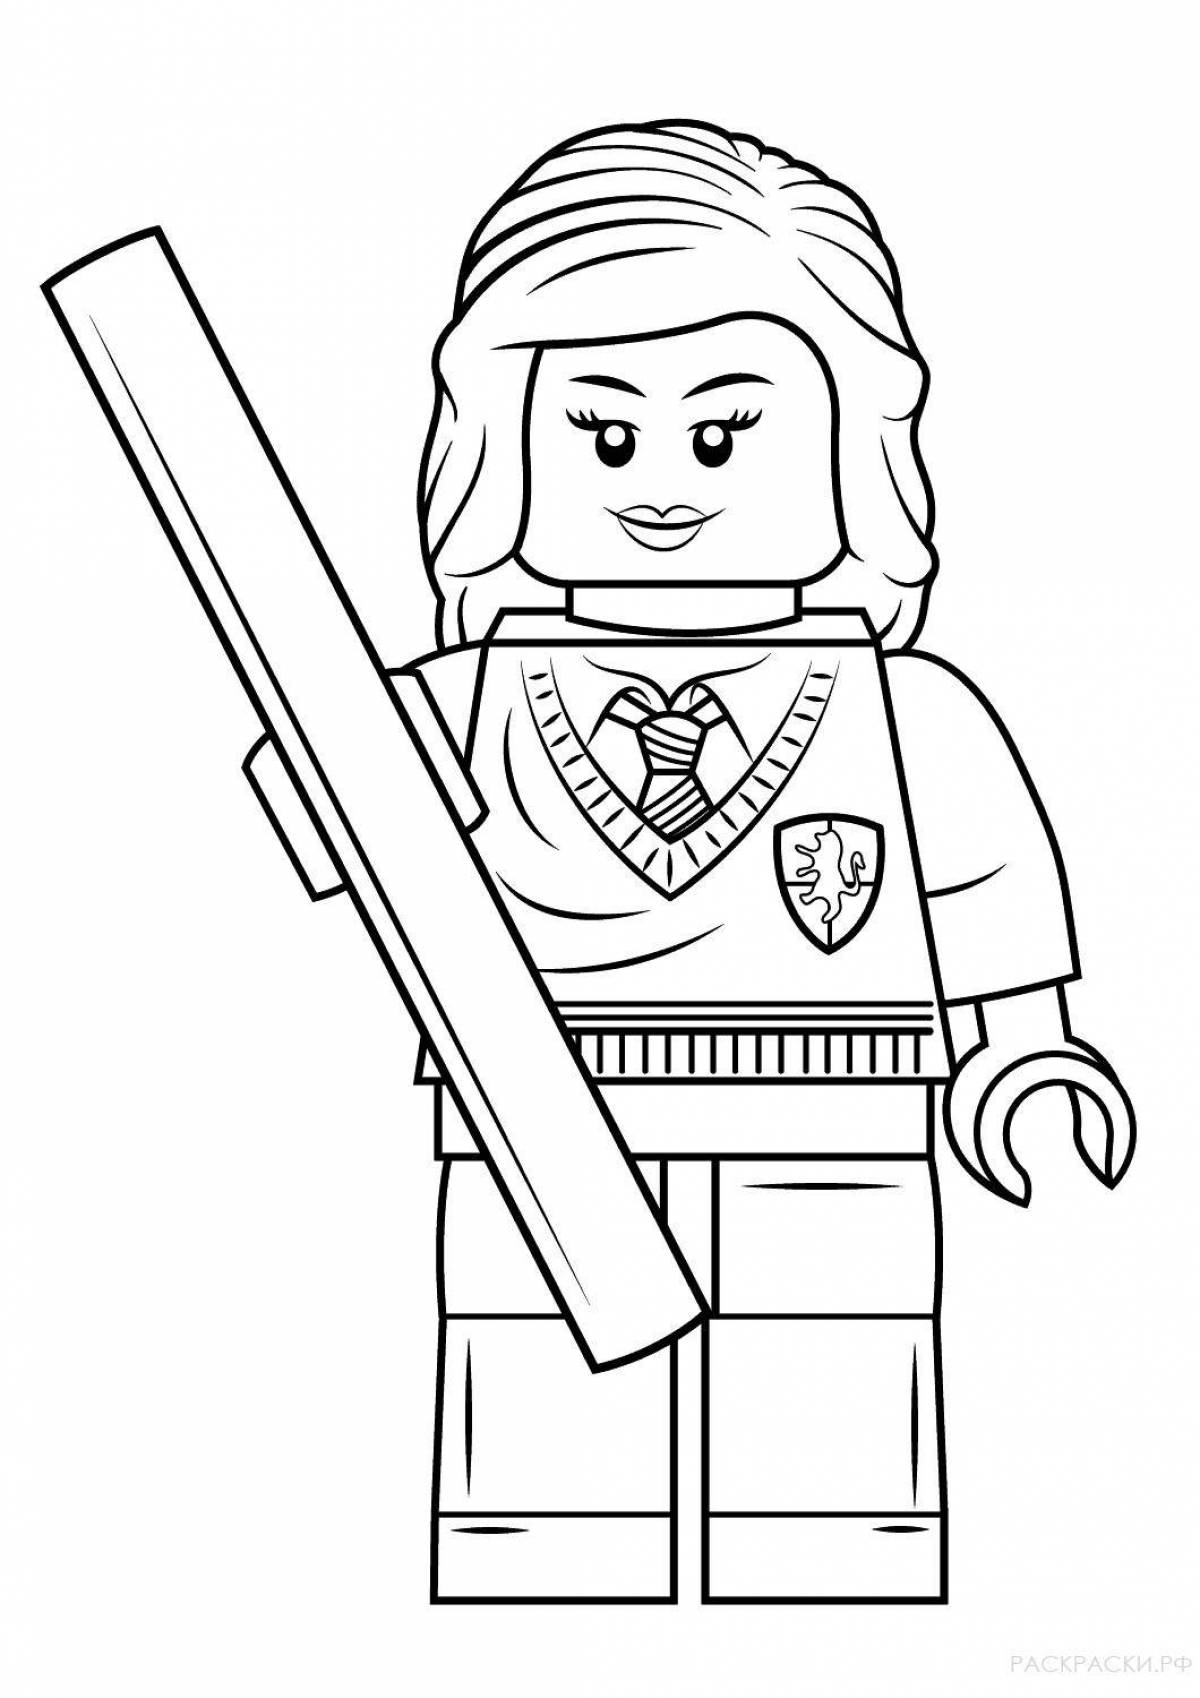 Lego harry potter adorable coloring book